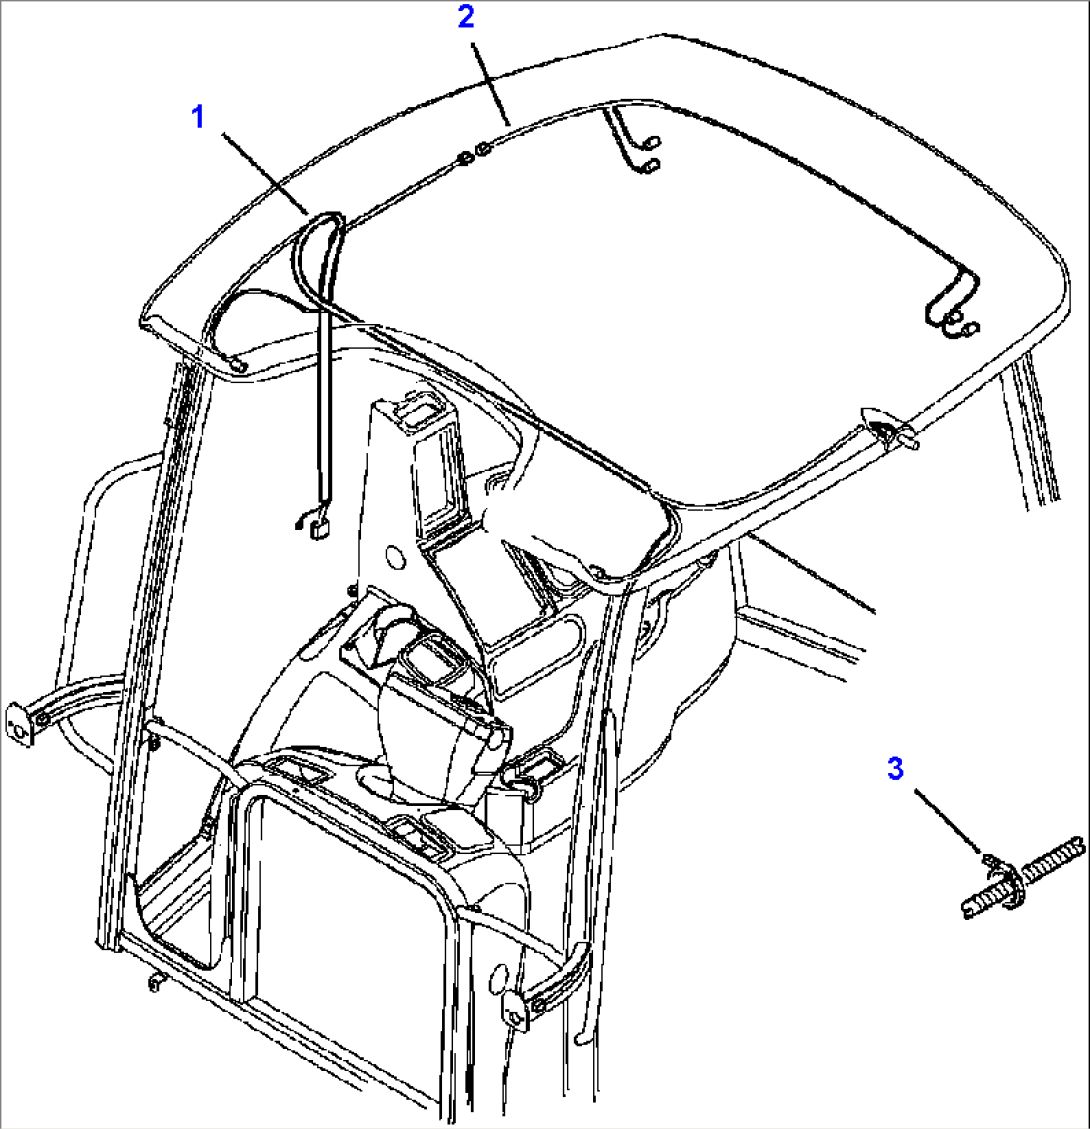 E1600-01A0 CANOPY WIRING (1/6) ROOF